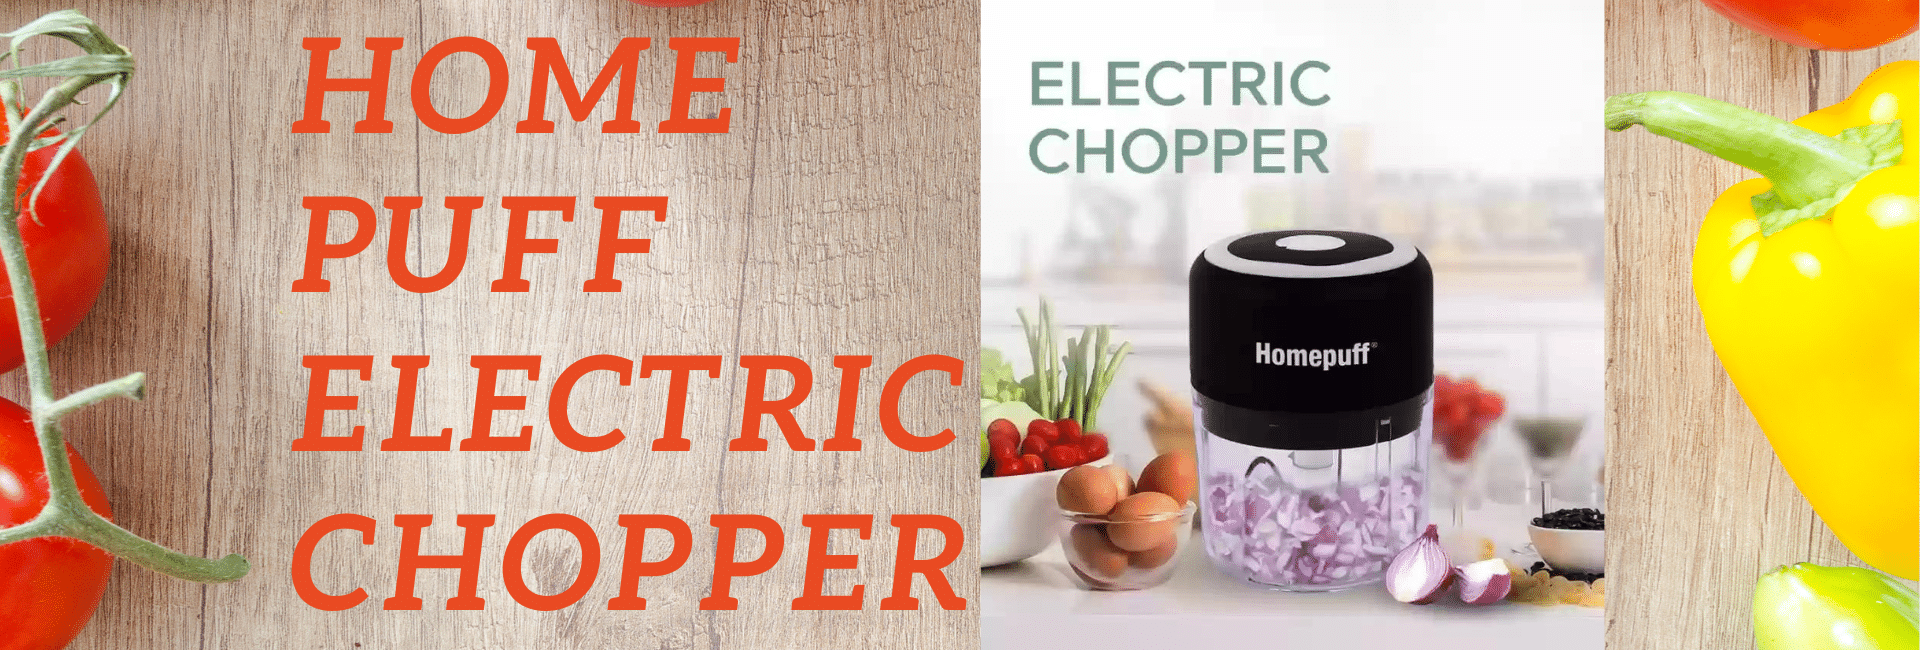 3 Best Reasons to Buy Home Puff Electric Chopper